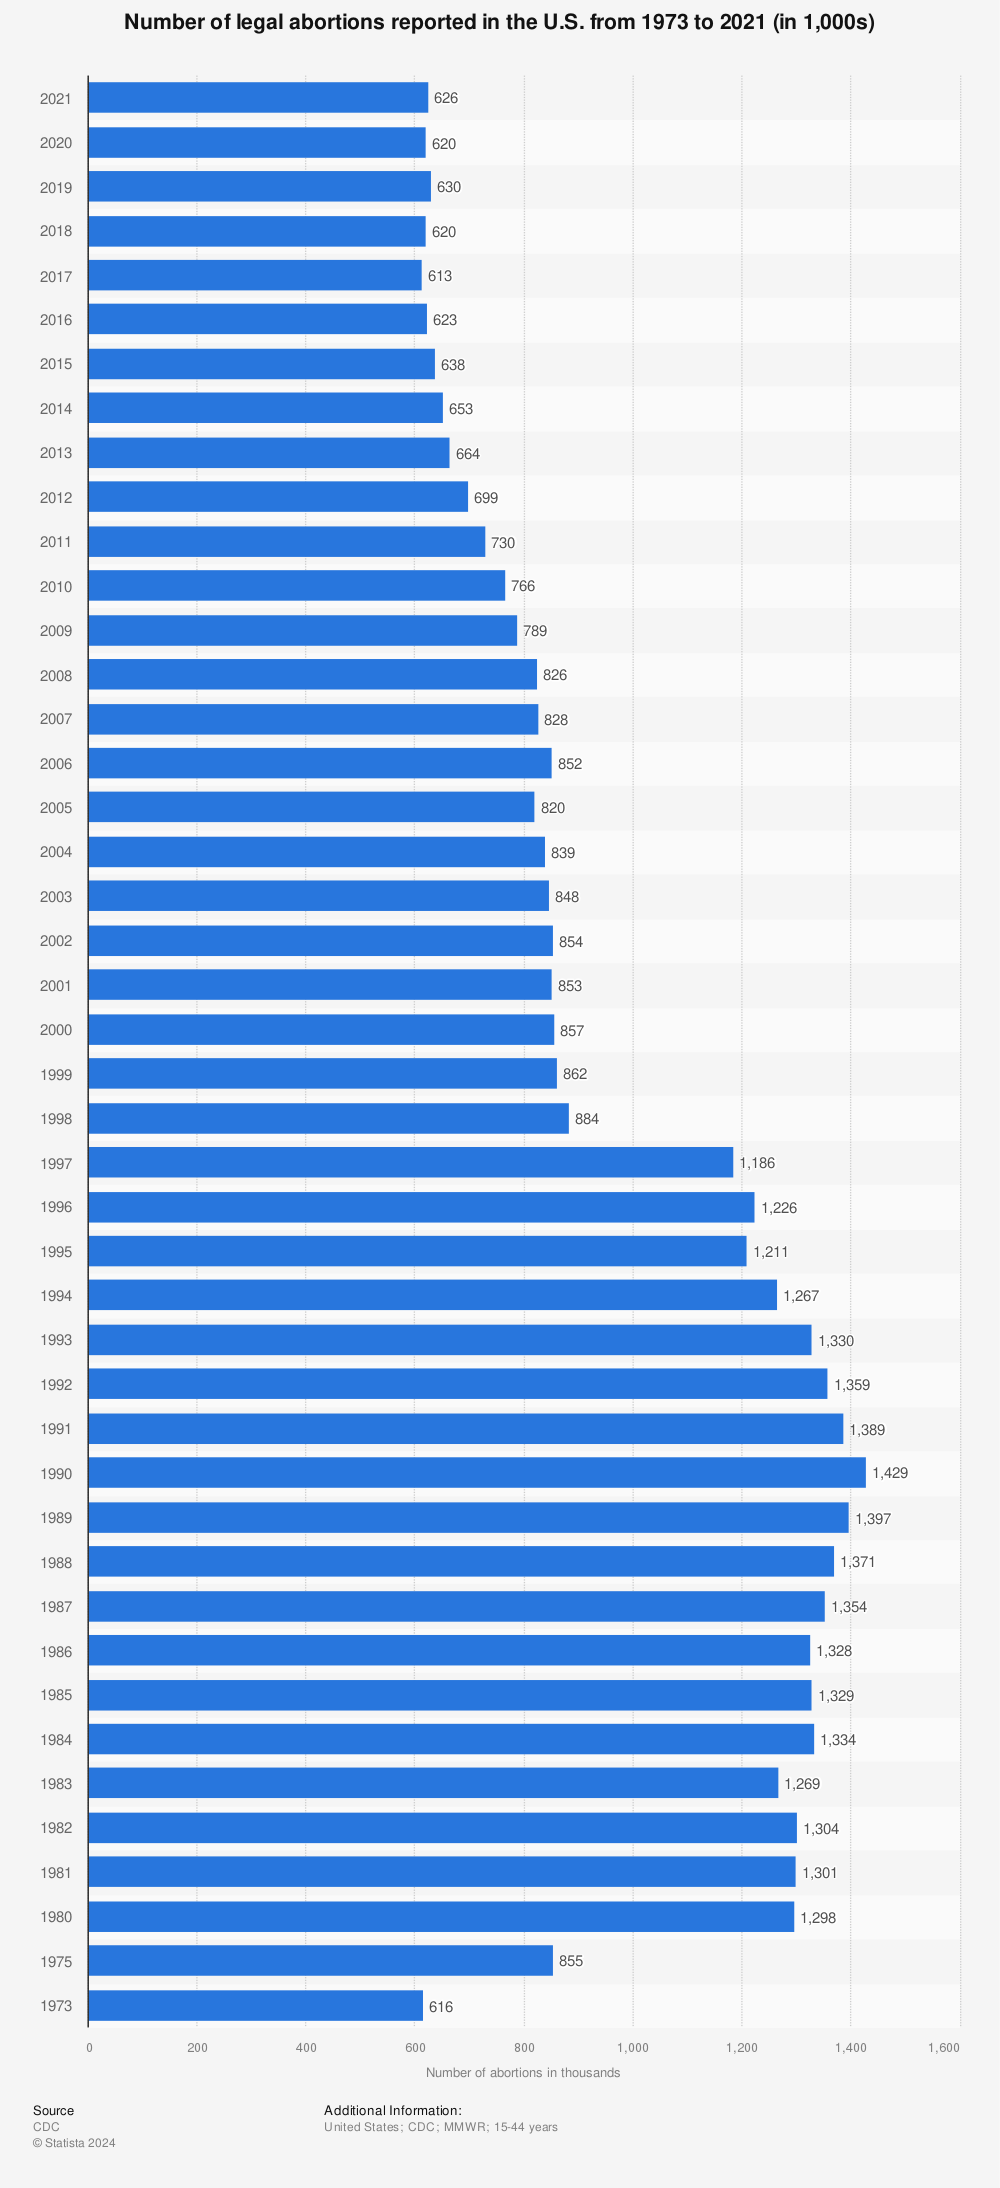 Statistic: Number of legal abortions reported in the U.S. from 1973 to 2019 (in 1,000) | Statista